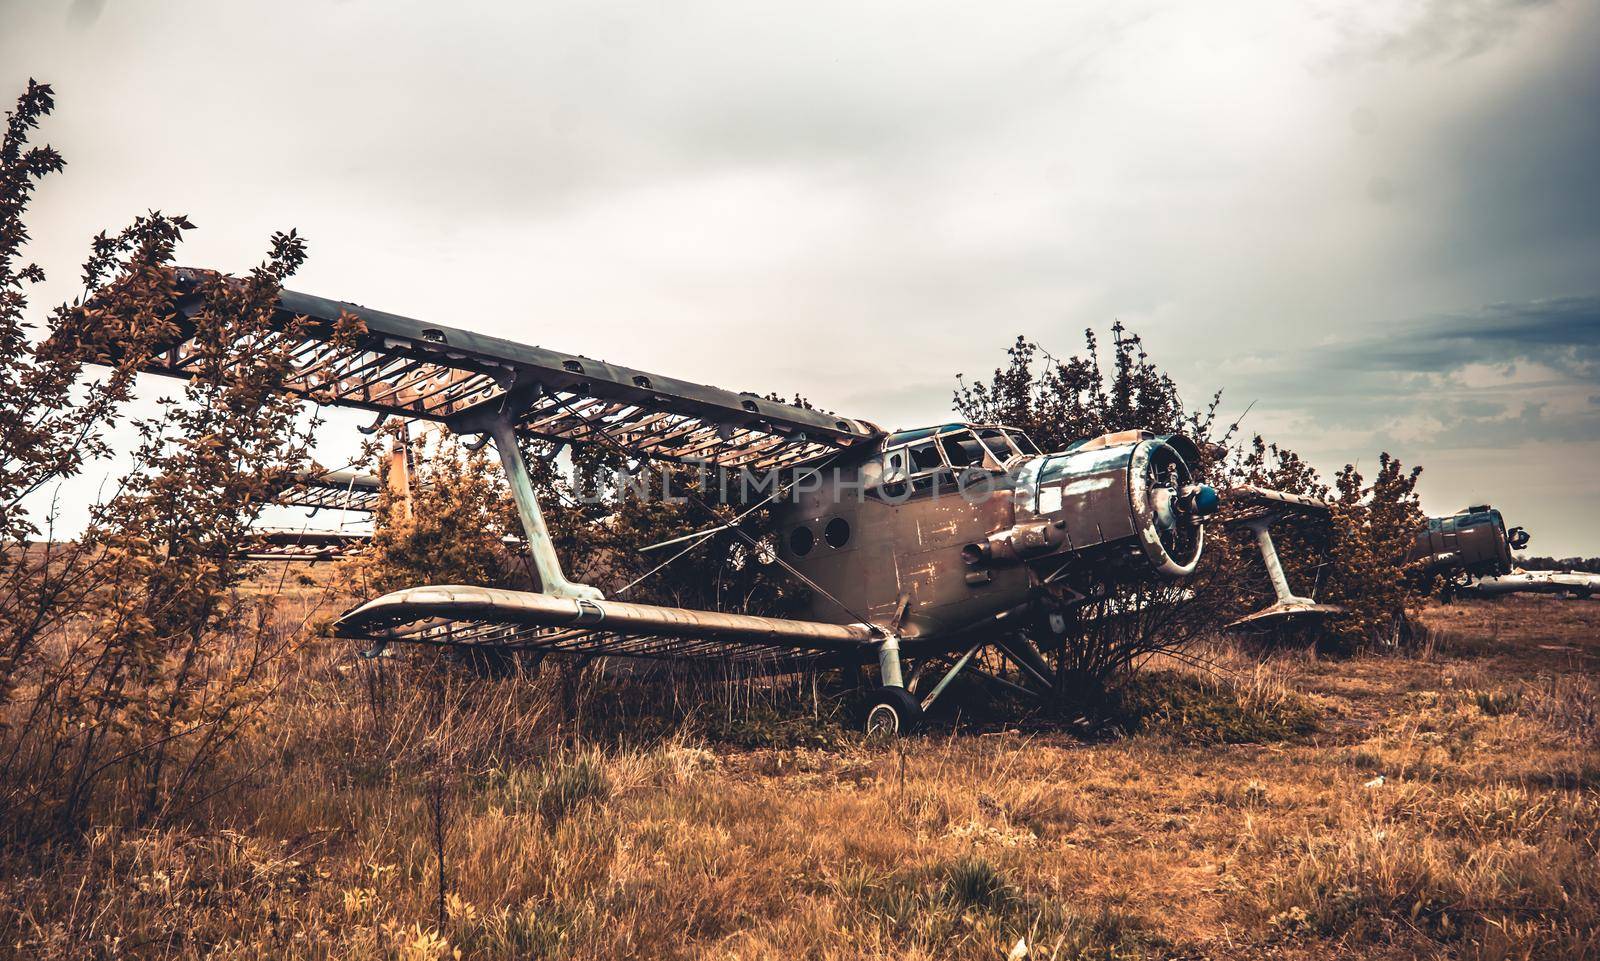 Abandoned airplane on the airfield